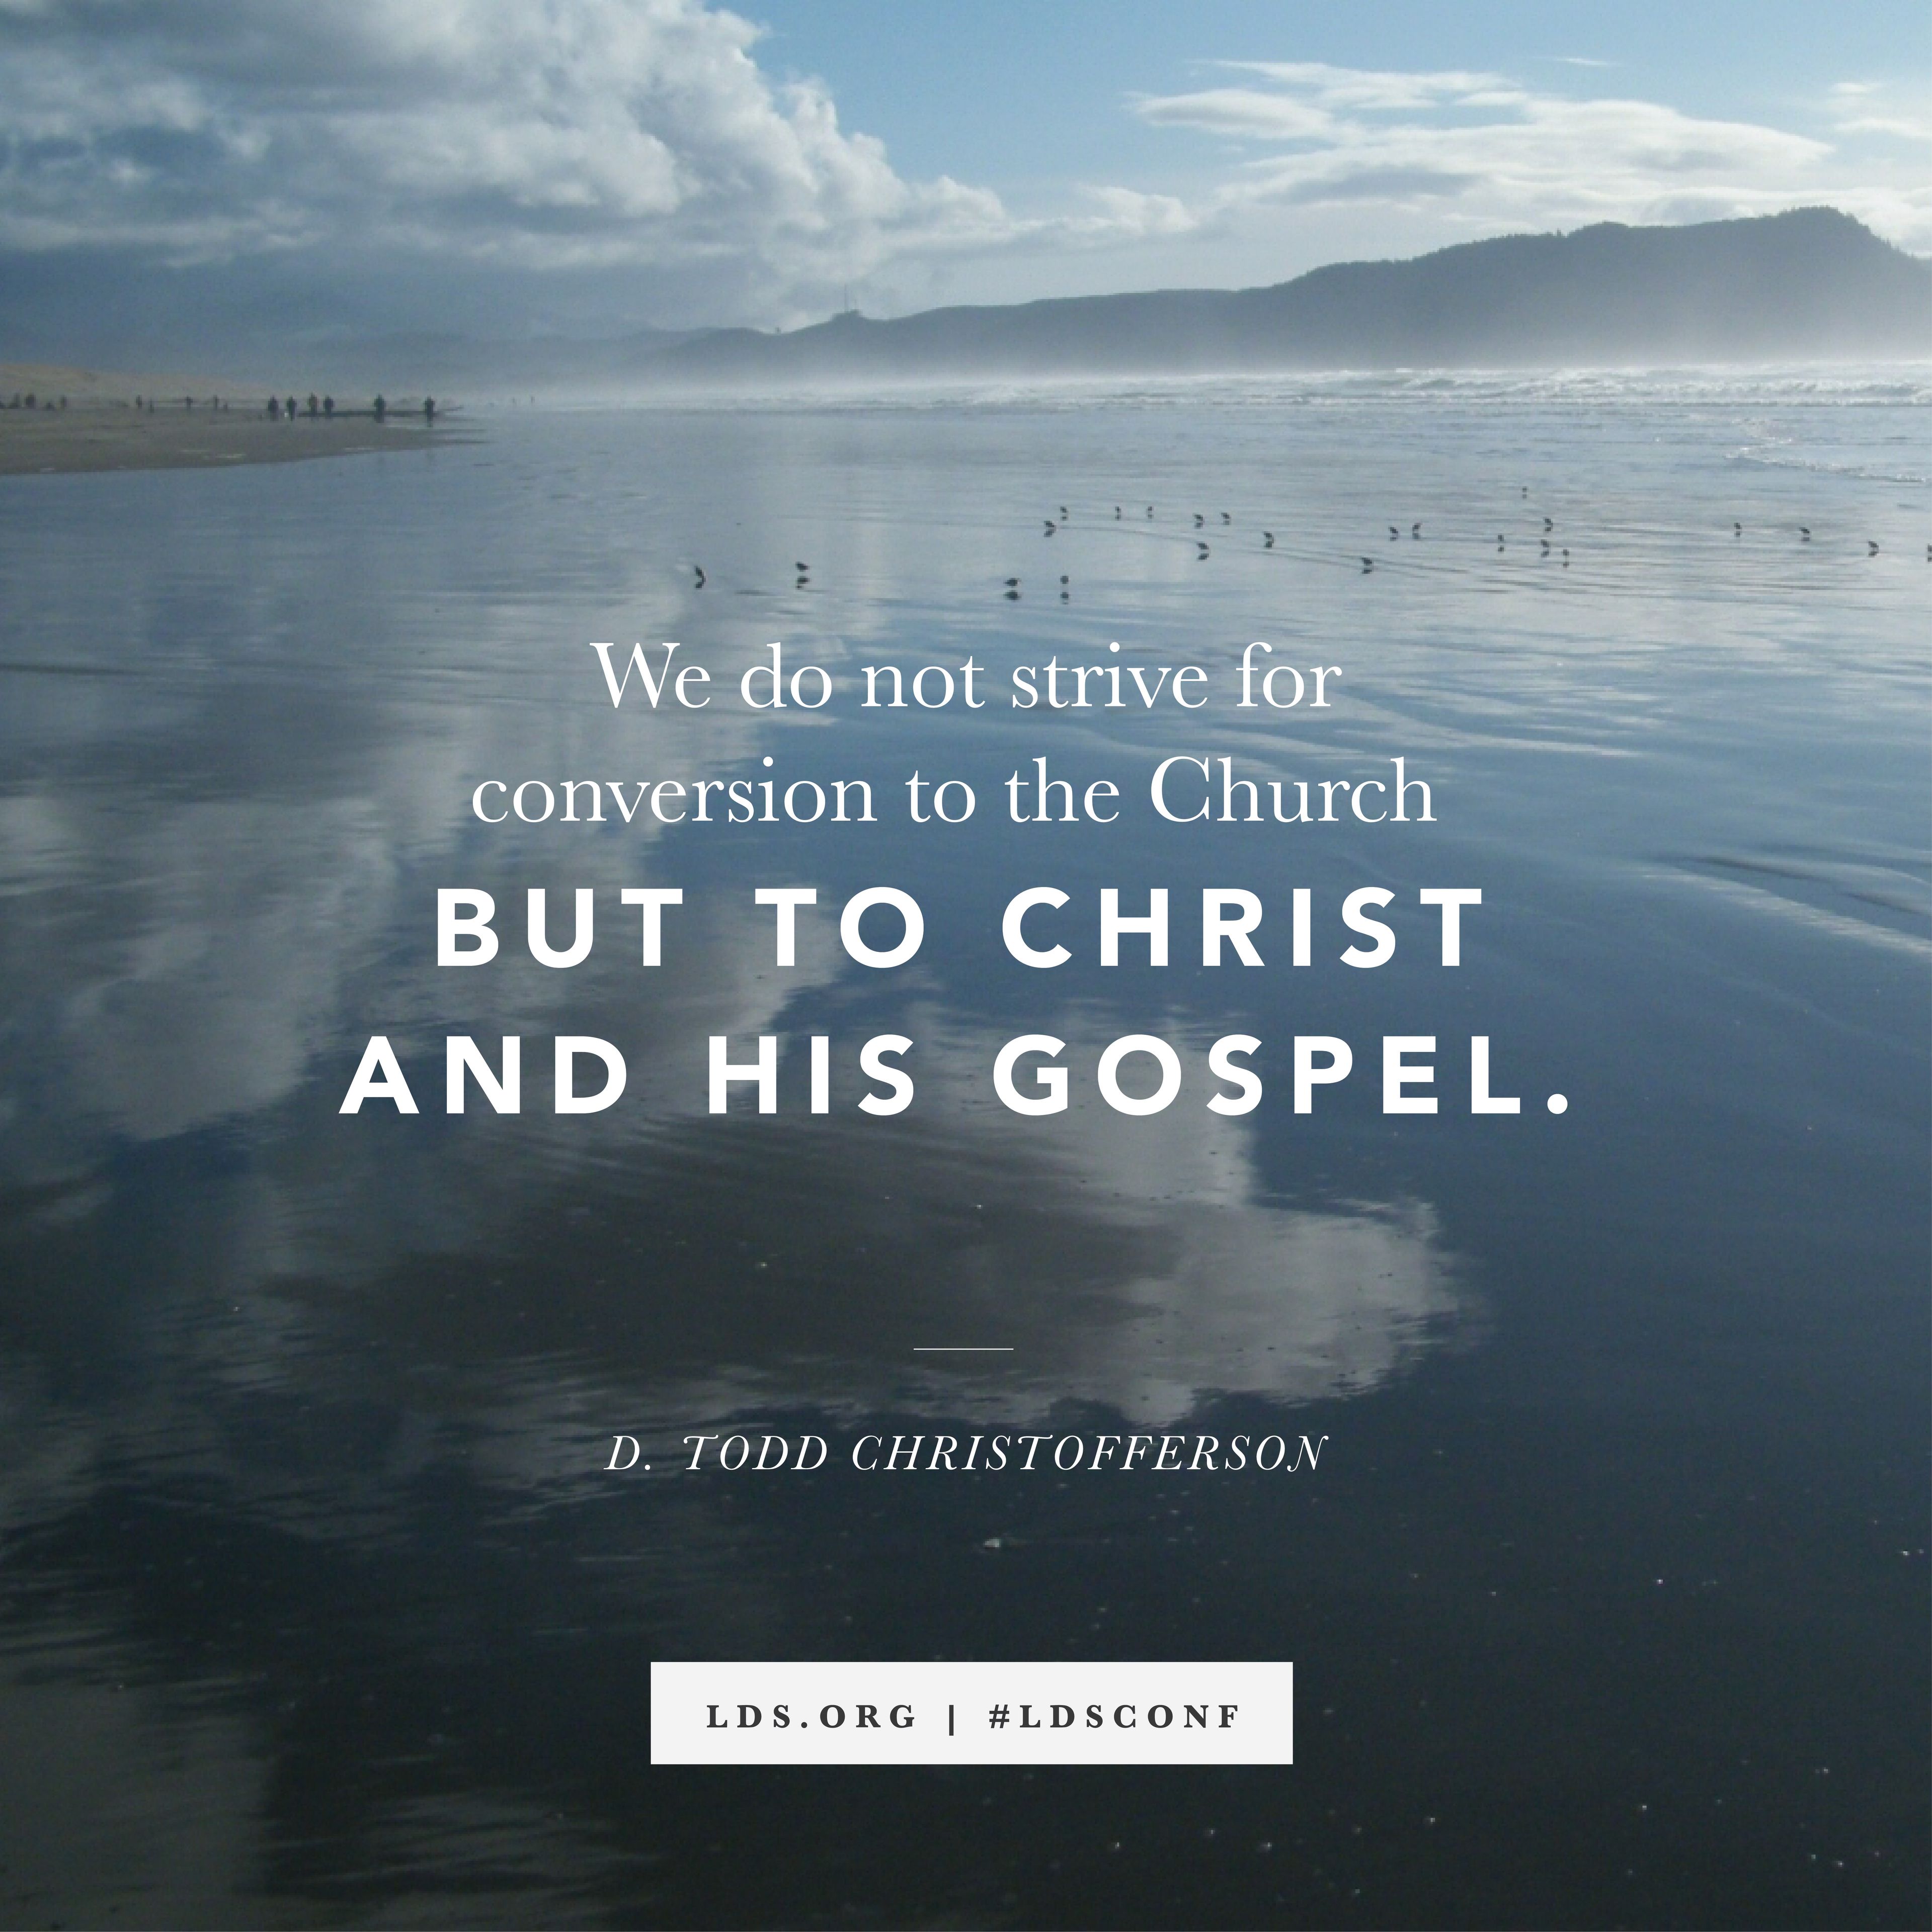 “We do not strive for conversion to the Church but to Christ and His gospel.” —Elder D. Todd Christofferson, “Why the Church” © undefined ipCode 1.